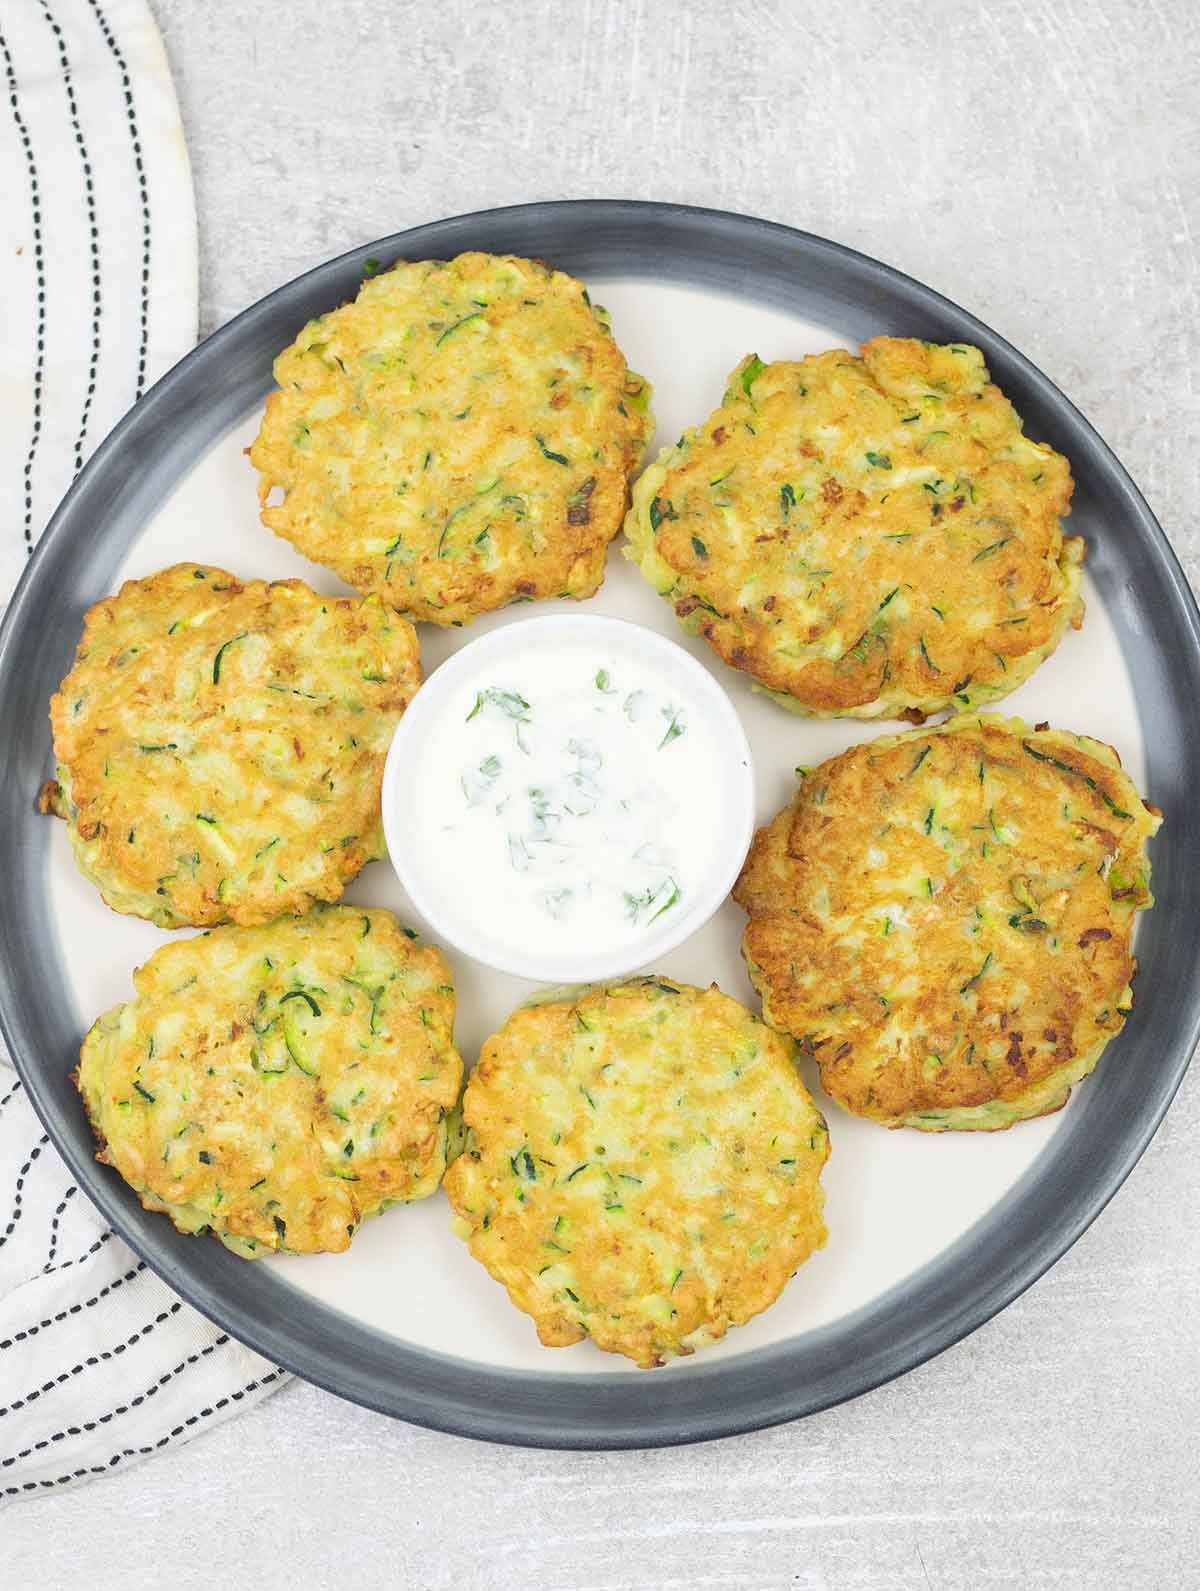 Zucchini pancakes on a serving plate and a bowl of sour cream sauce.